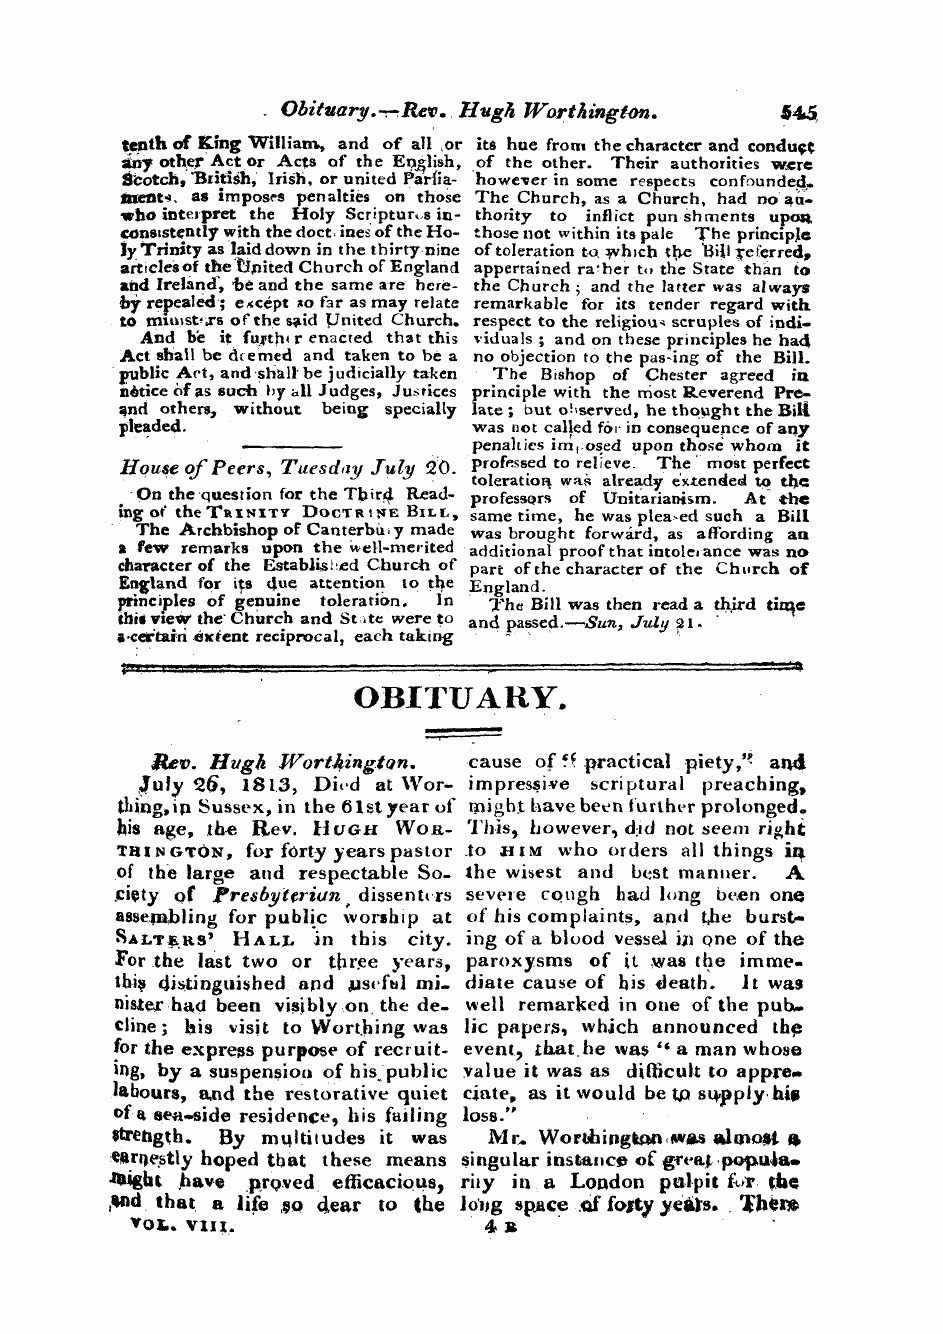 Monthly Repository (1806-1838) and Unitarian Chronicle (1832-1833): F Y, 1st edition - Obituary.